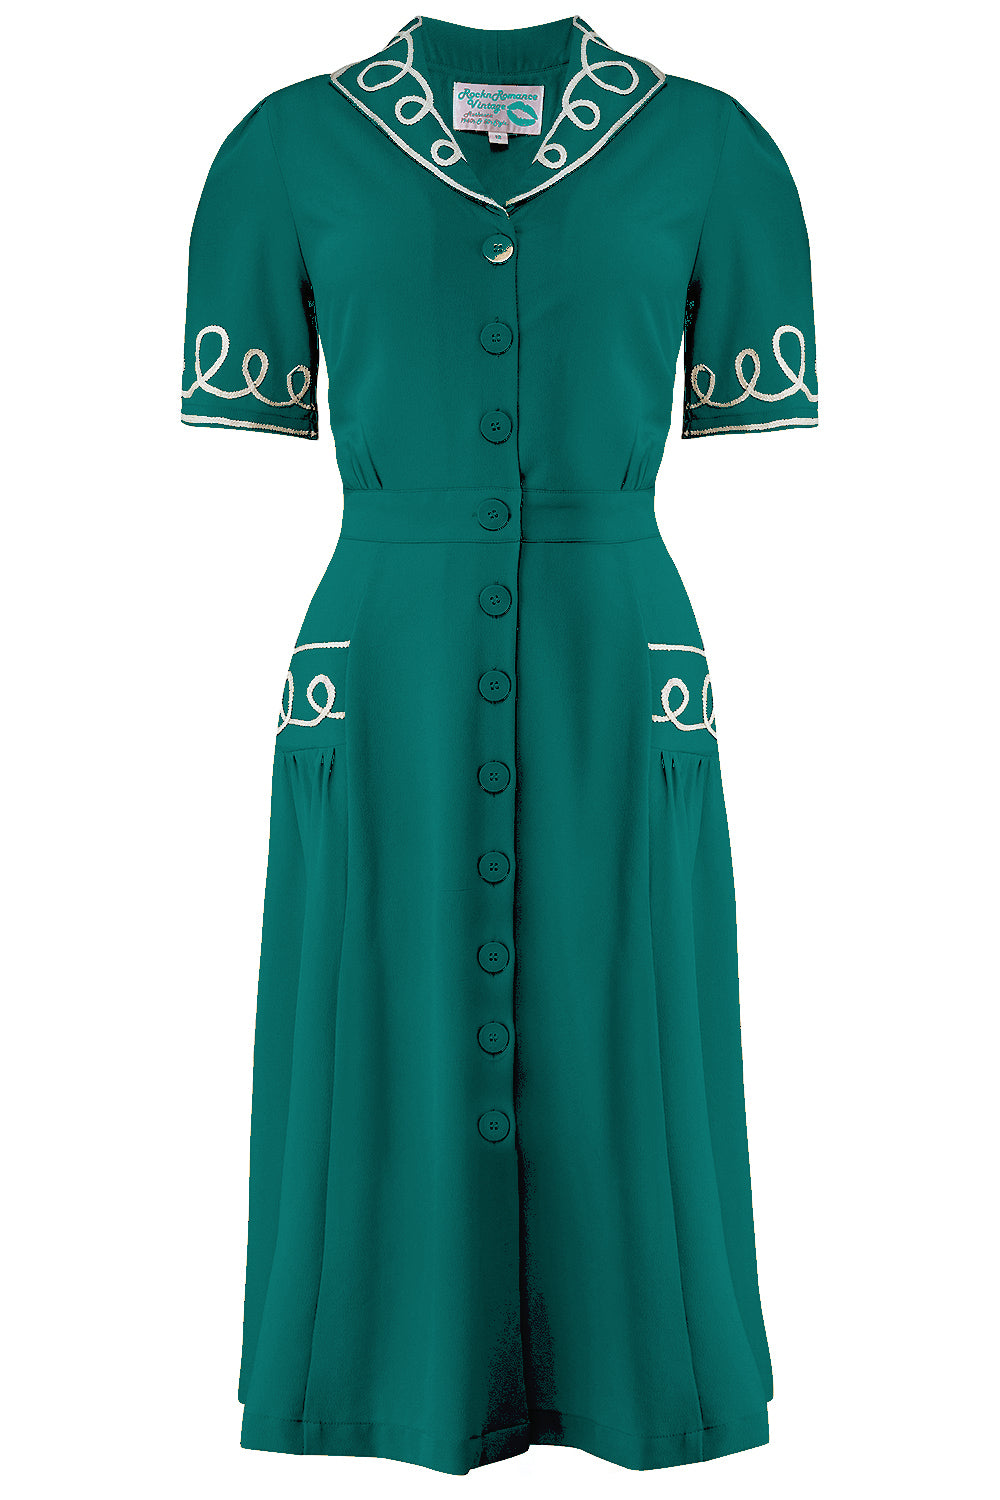 1940s Fashion Advice for Short Women The Loopy-Lou Shirtwaister Dress in Teal with Contrast RicRac True 1950s Vintage Style £49.95 AT vintagedancer.com